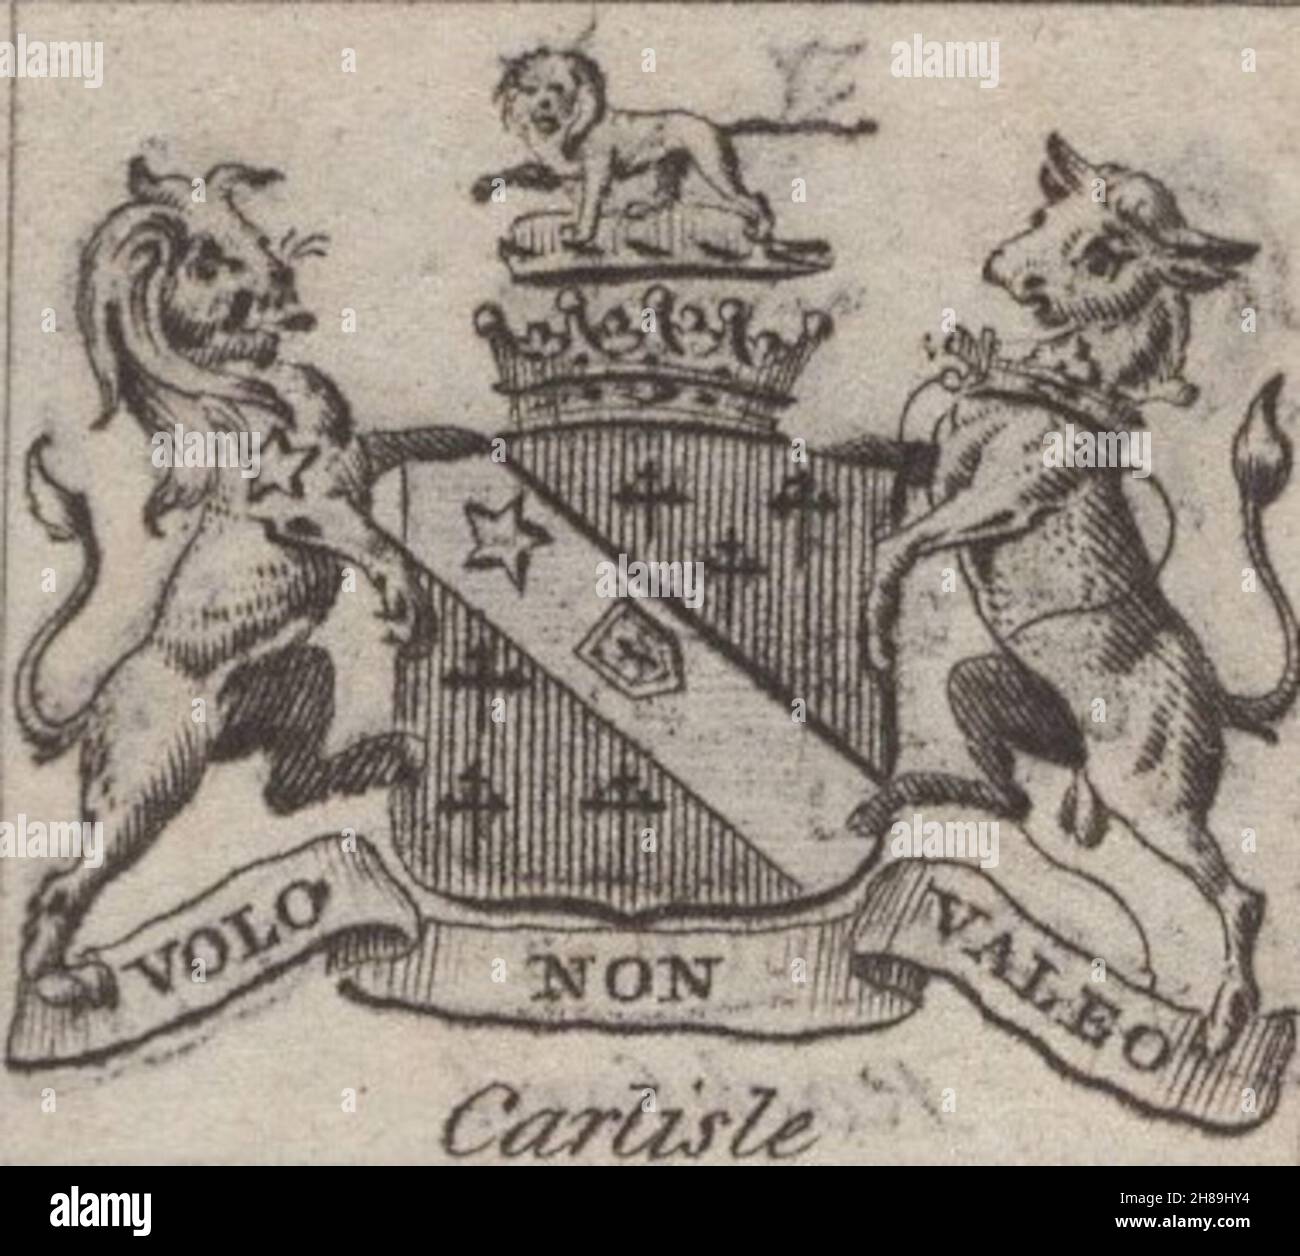 antique 18th century engraving heraldy coats of arms, English Earls , Motto / slogan: Volo non Valeo. Carlisle. by Woodman & Mutlow fc russel co circa 1780s Source: original engravings from  the annual almanach book. Stock Photo